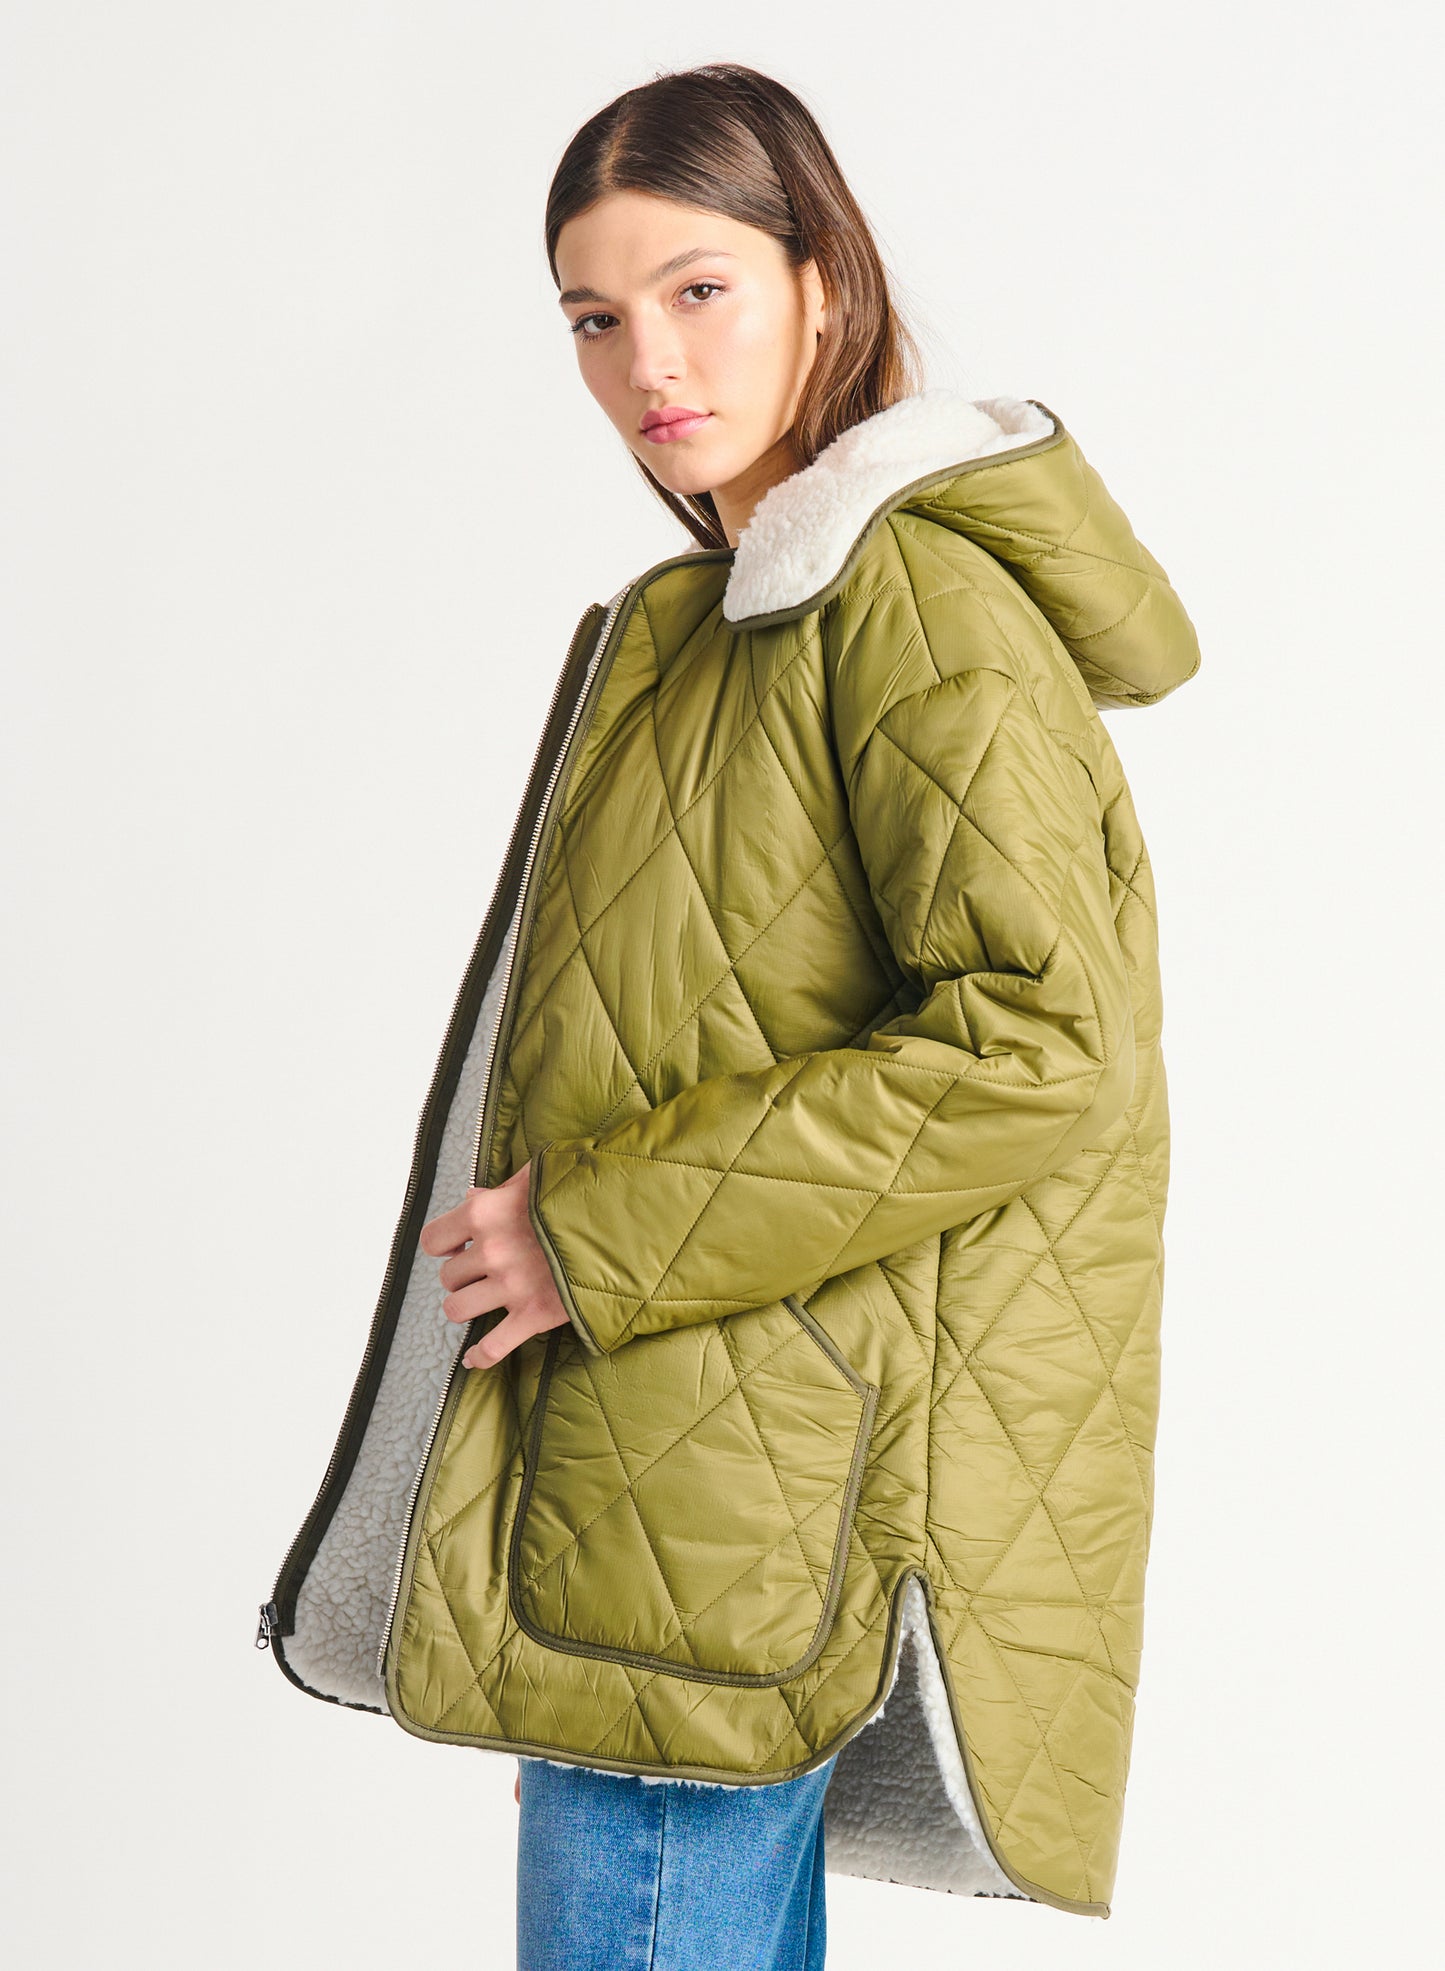 Olive Green Sherpa Lined Quilted Jacket